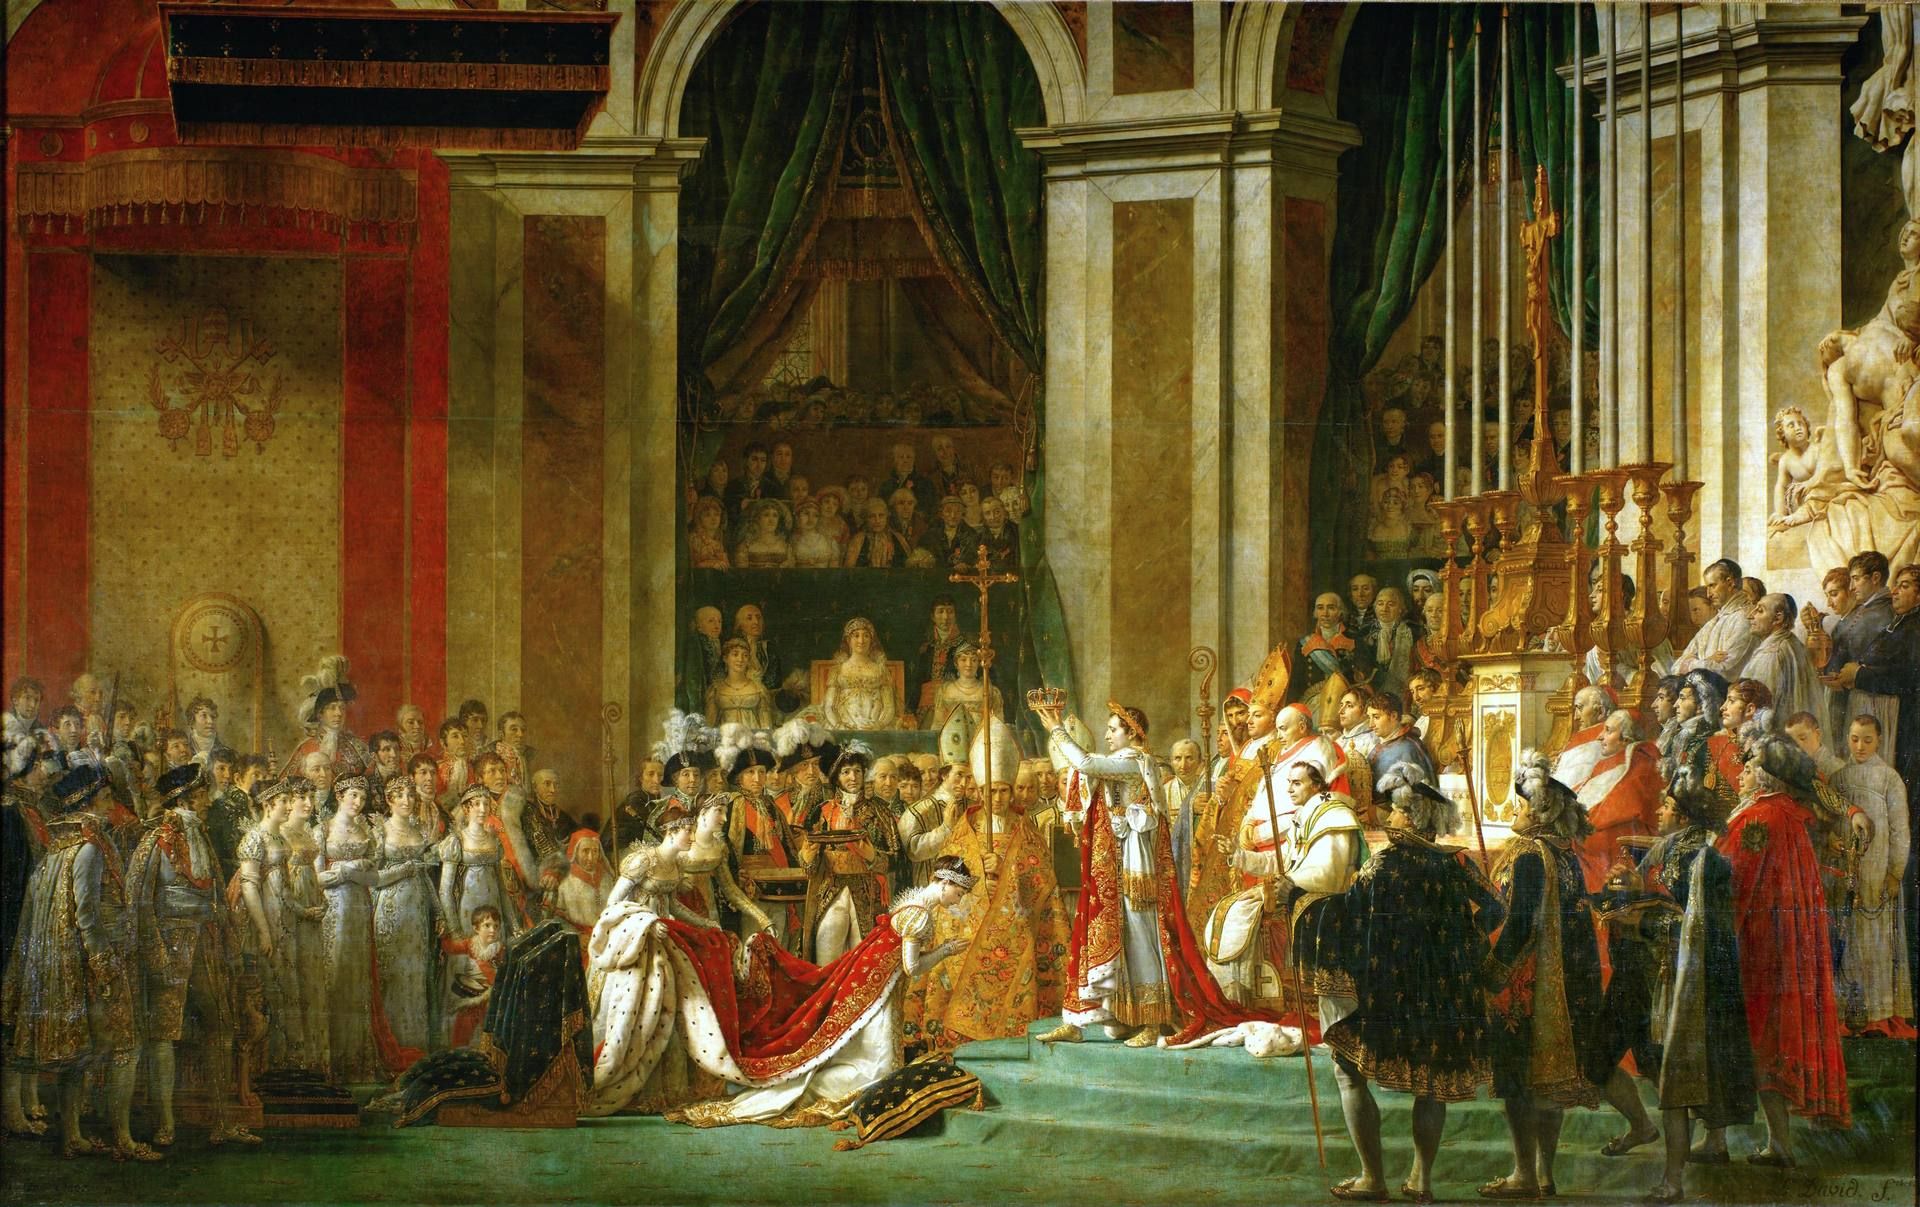 The coronation of Napoleon as Emperor of the French, represented by Jacques-Louis David and Georges Rouget.